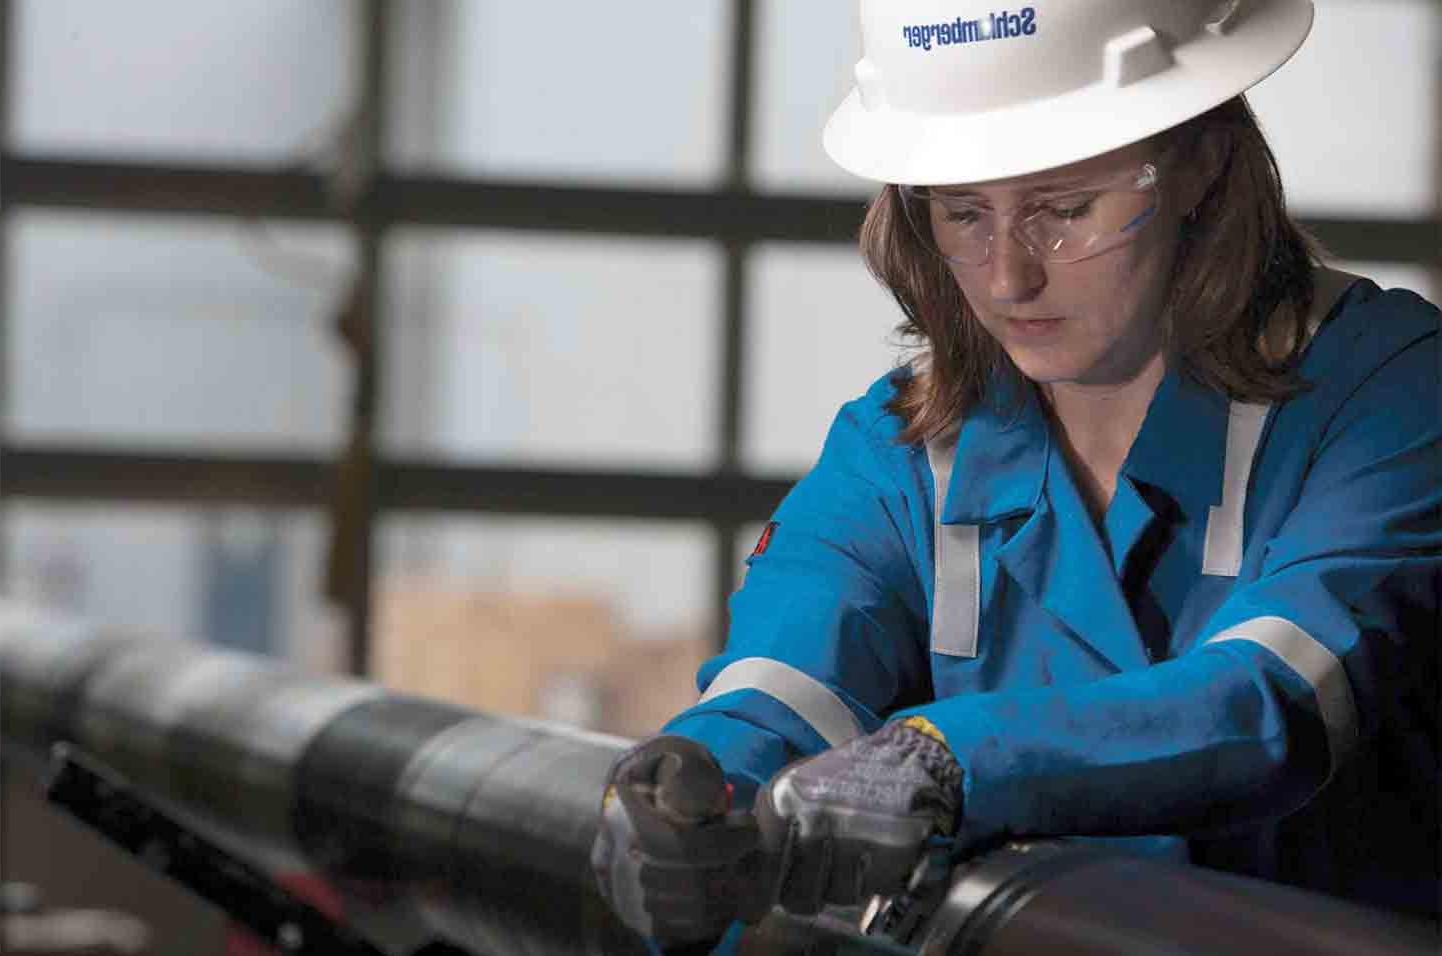 The image showing woman engineer working on the IRDV dual valve.